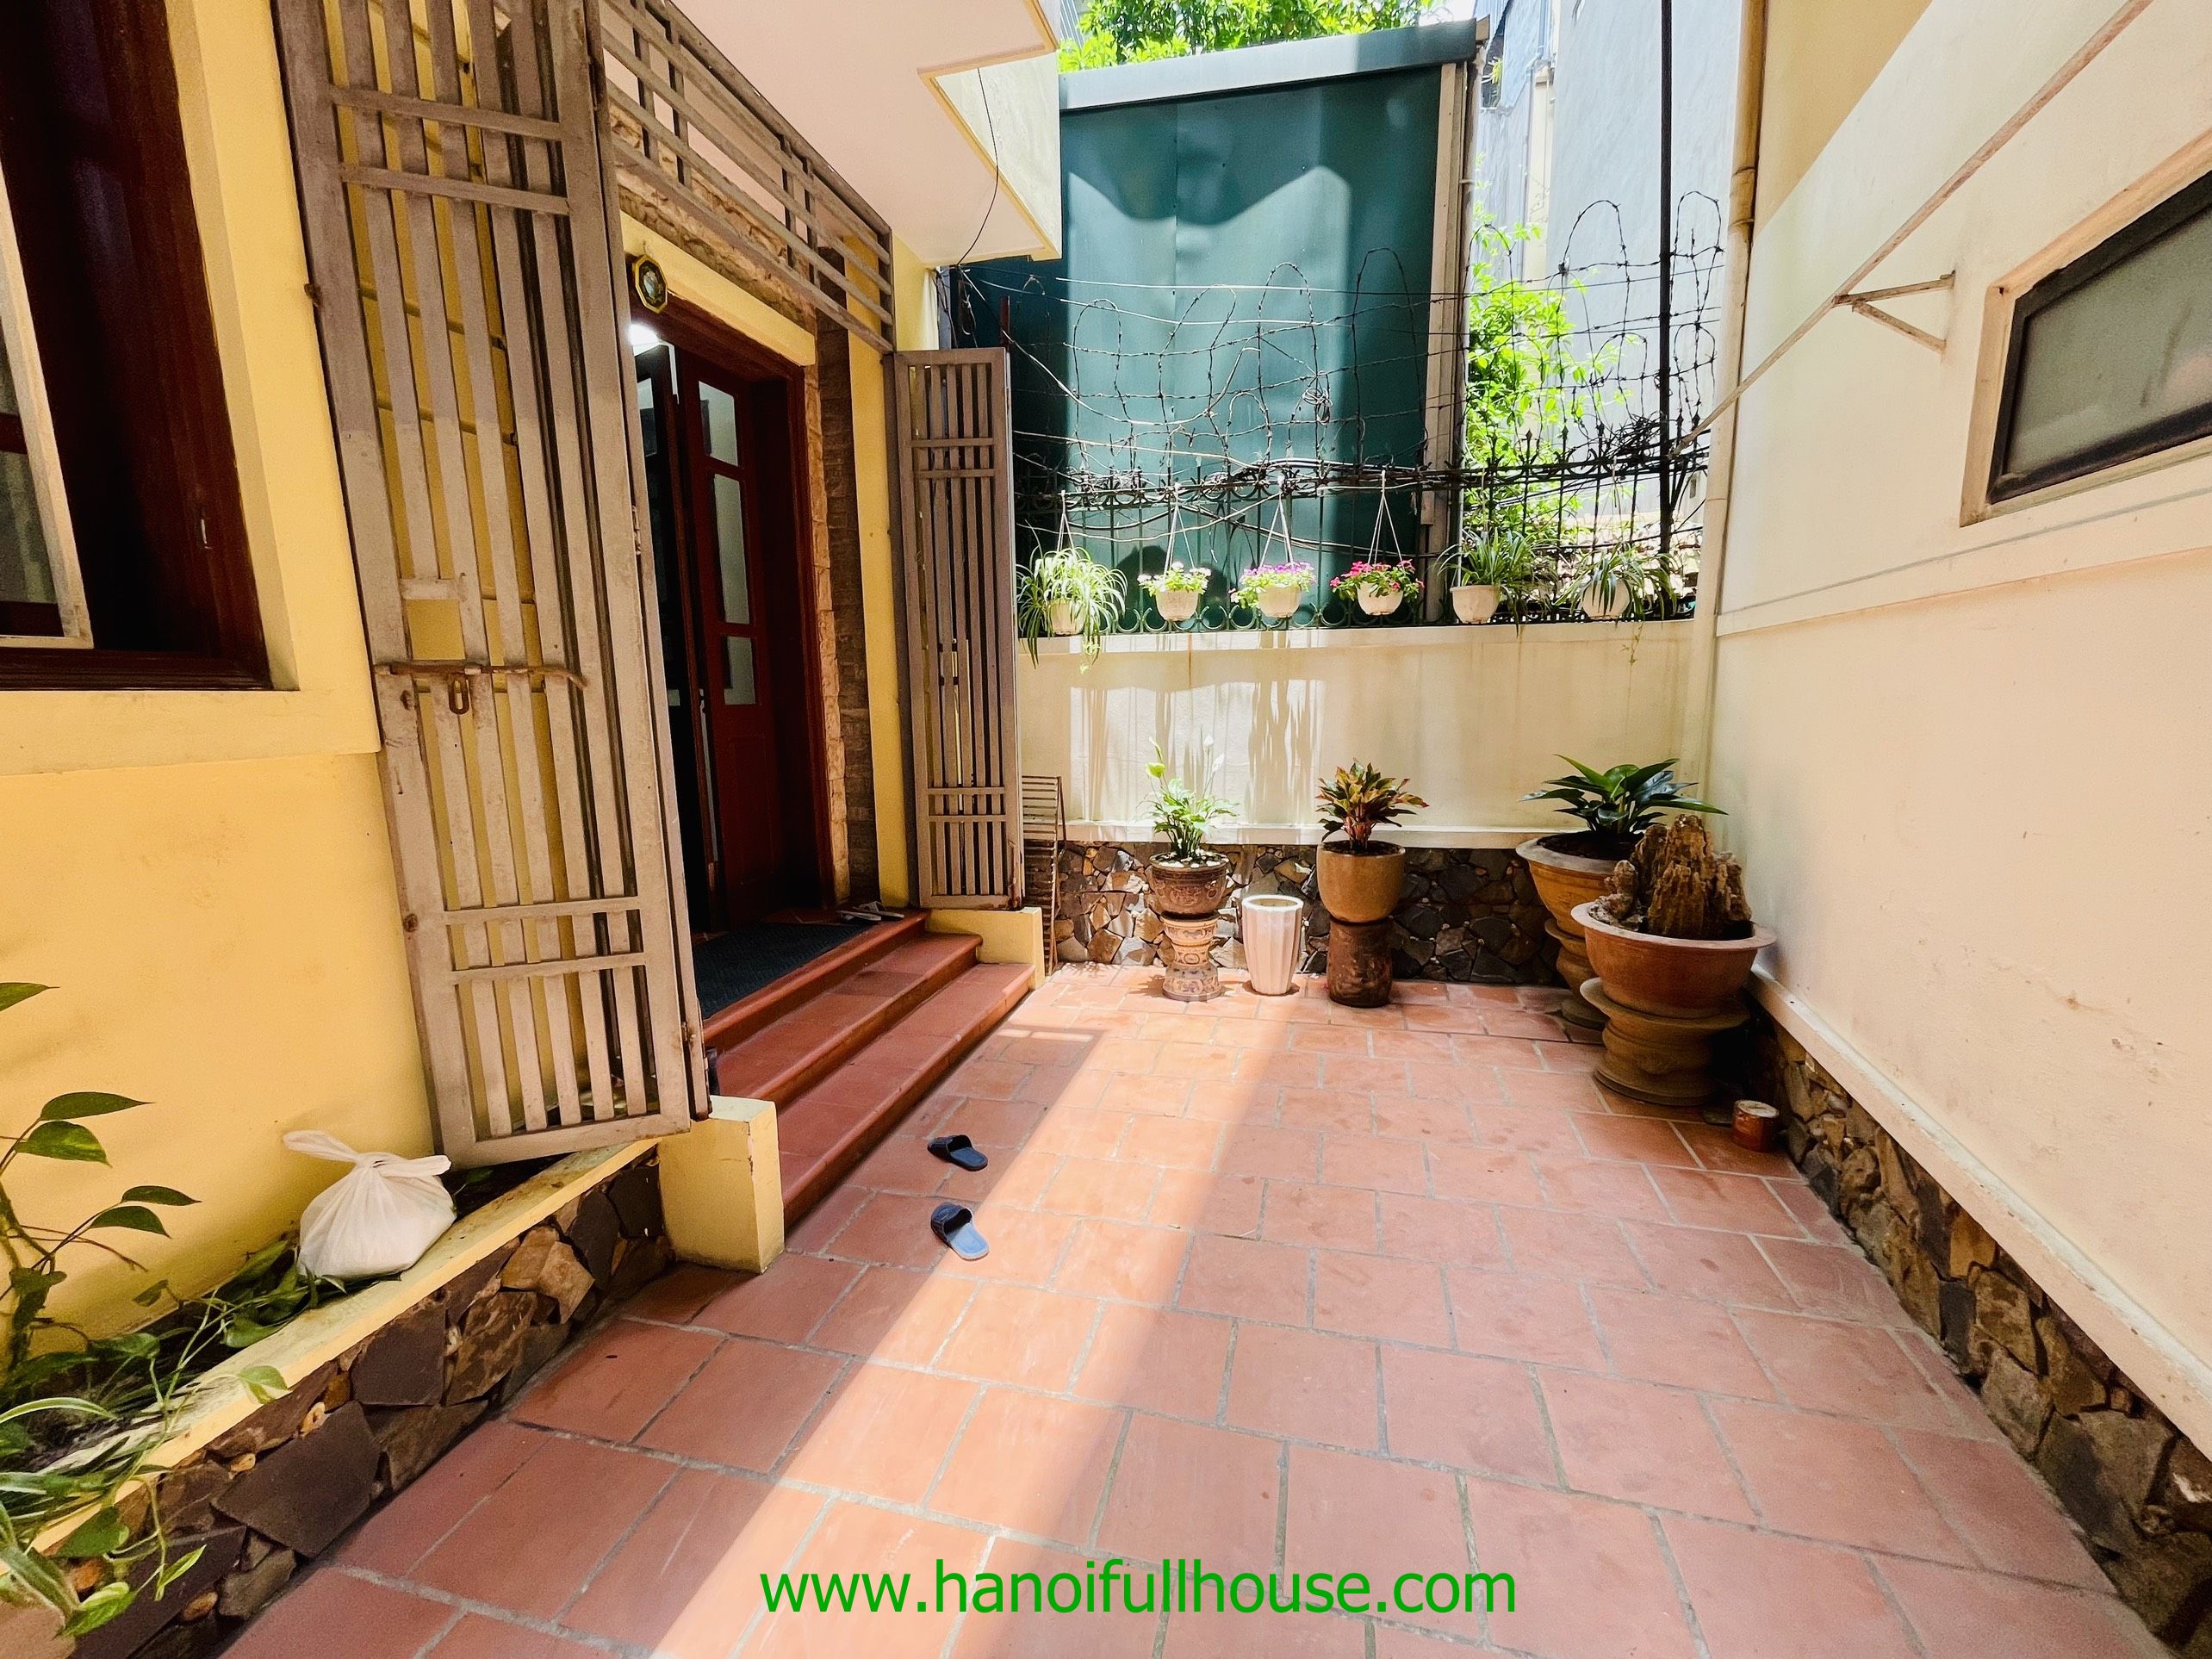 For rent 4 bedroom house at cheap price on Tu Hoa str